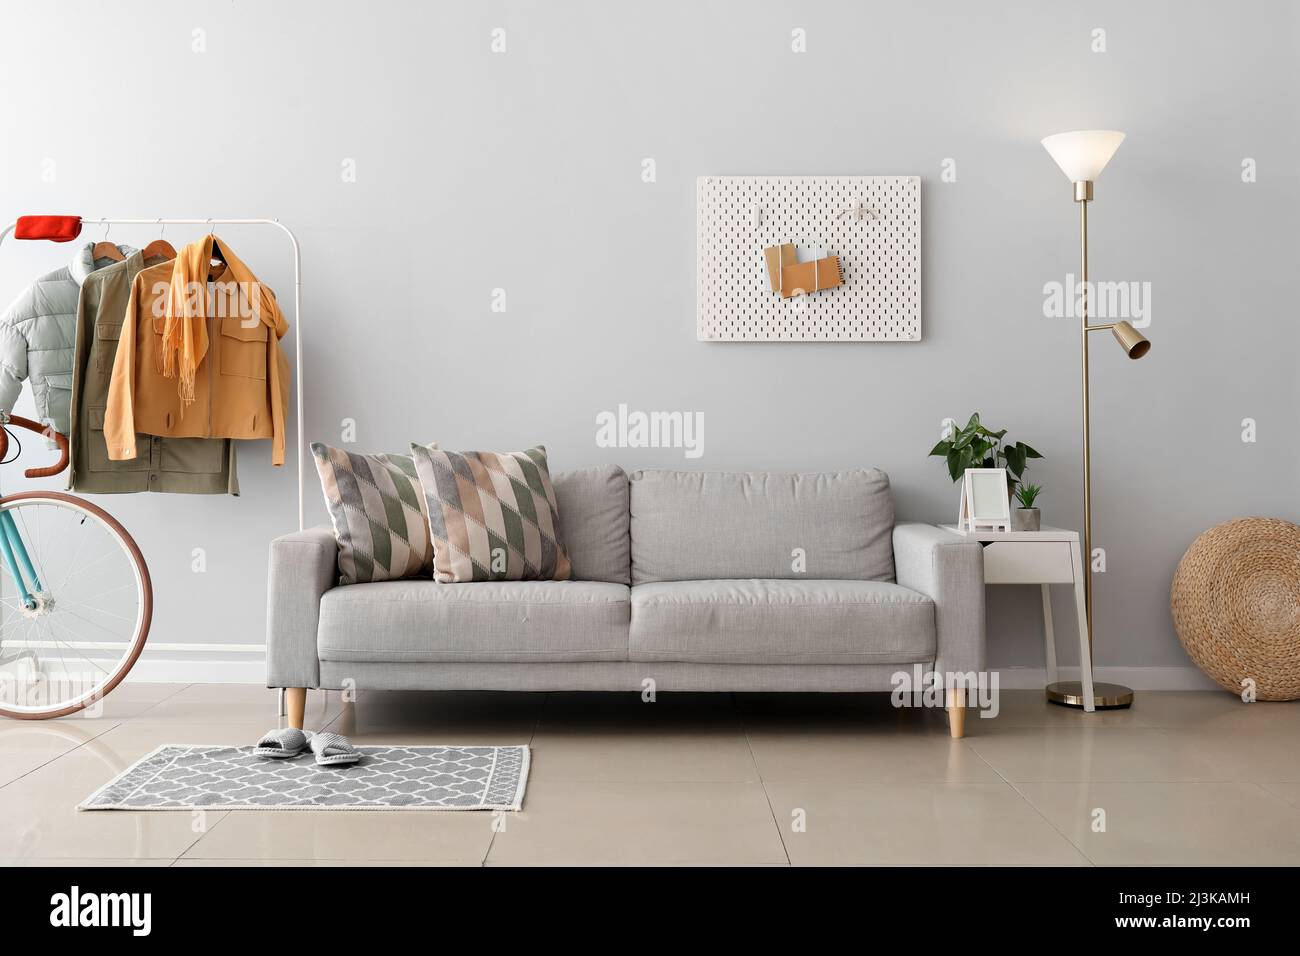 Interior of stylish living room with sofa, glowing lamp and stylish jackets Stock Photo